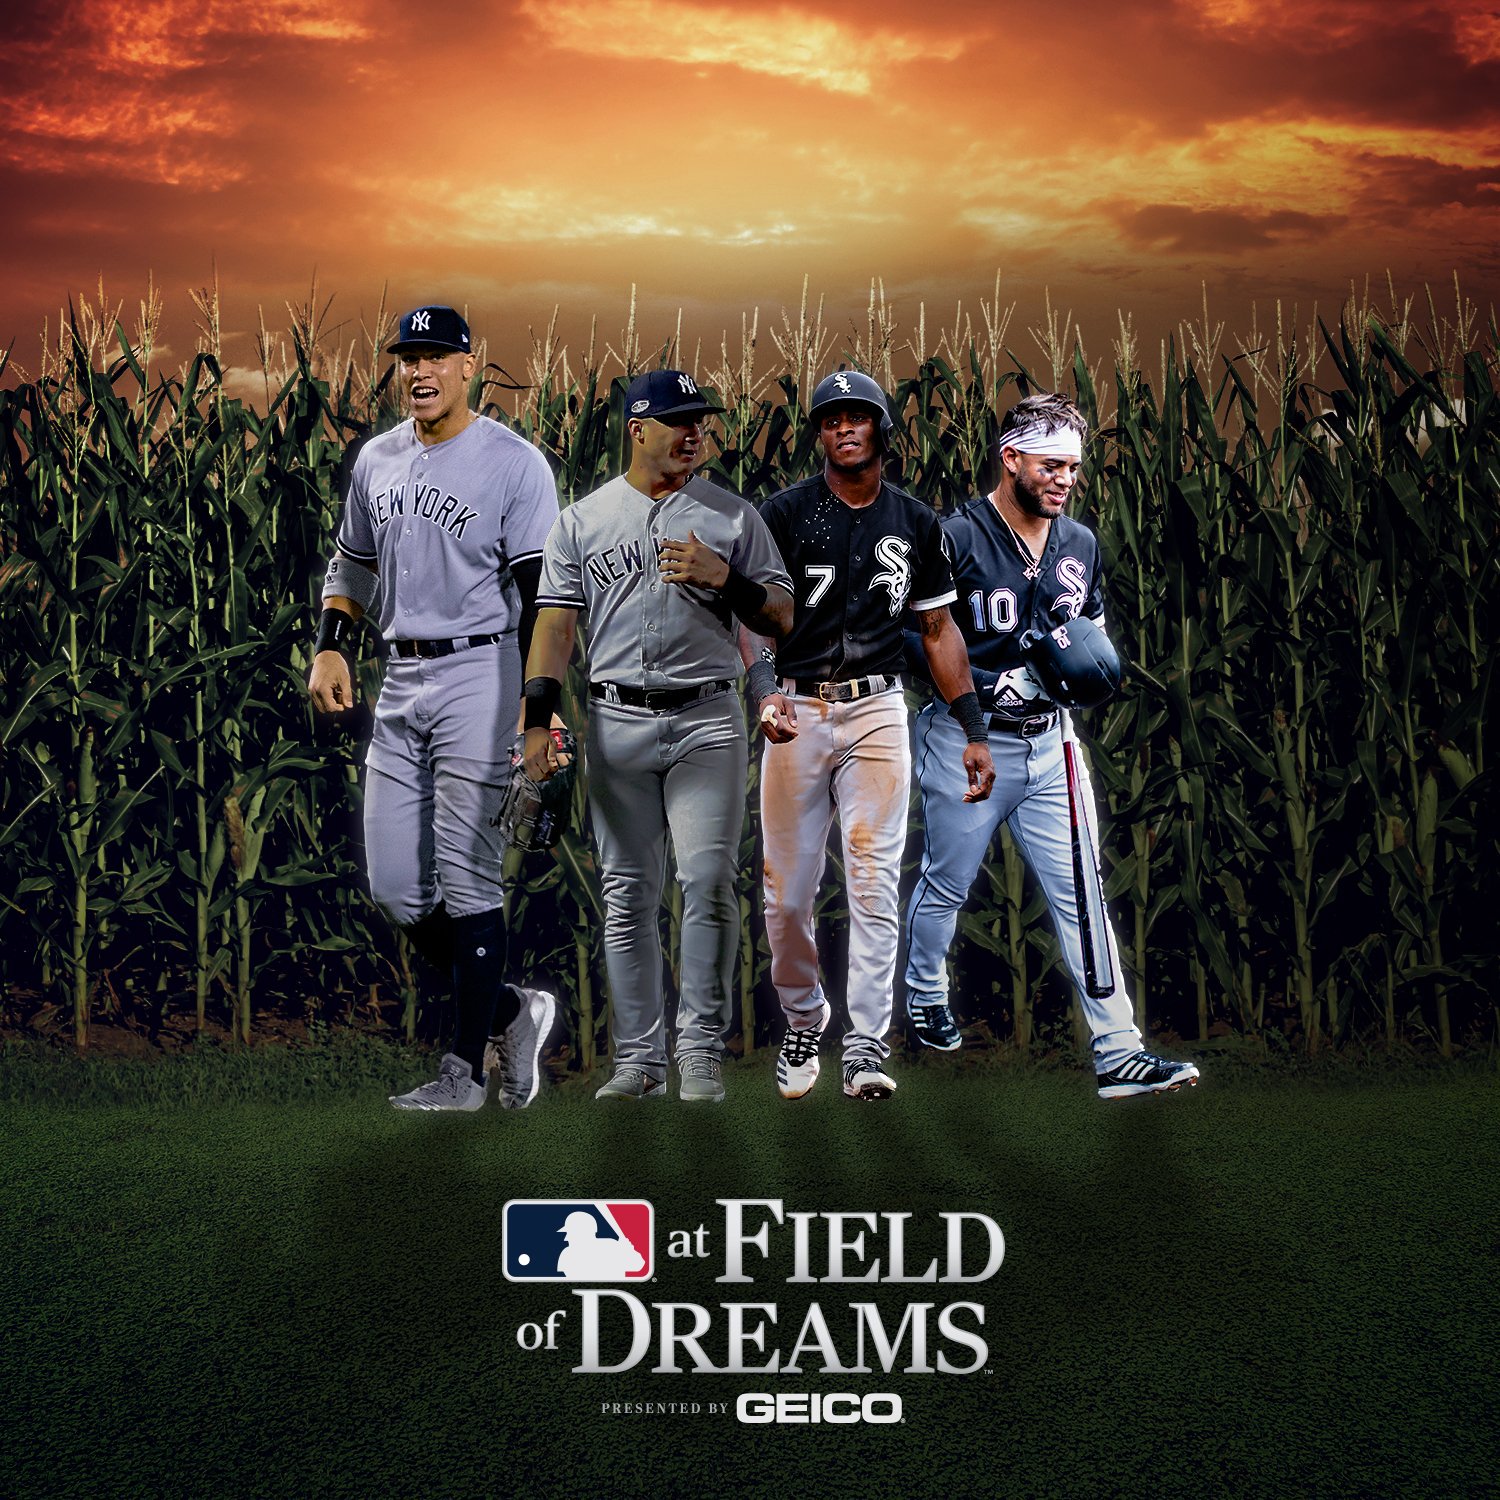 Field of Dreams' game brings touch of history to MLB season